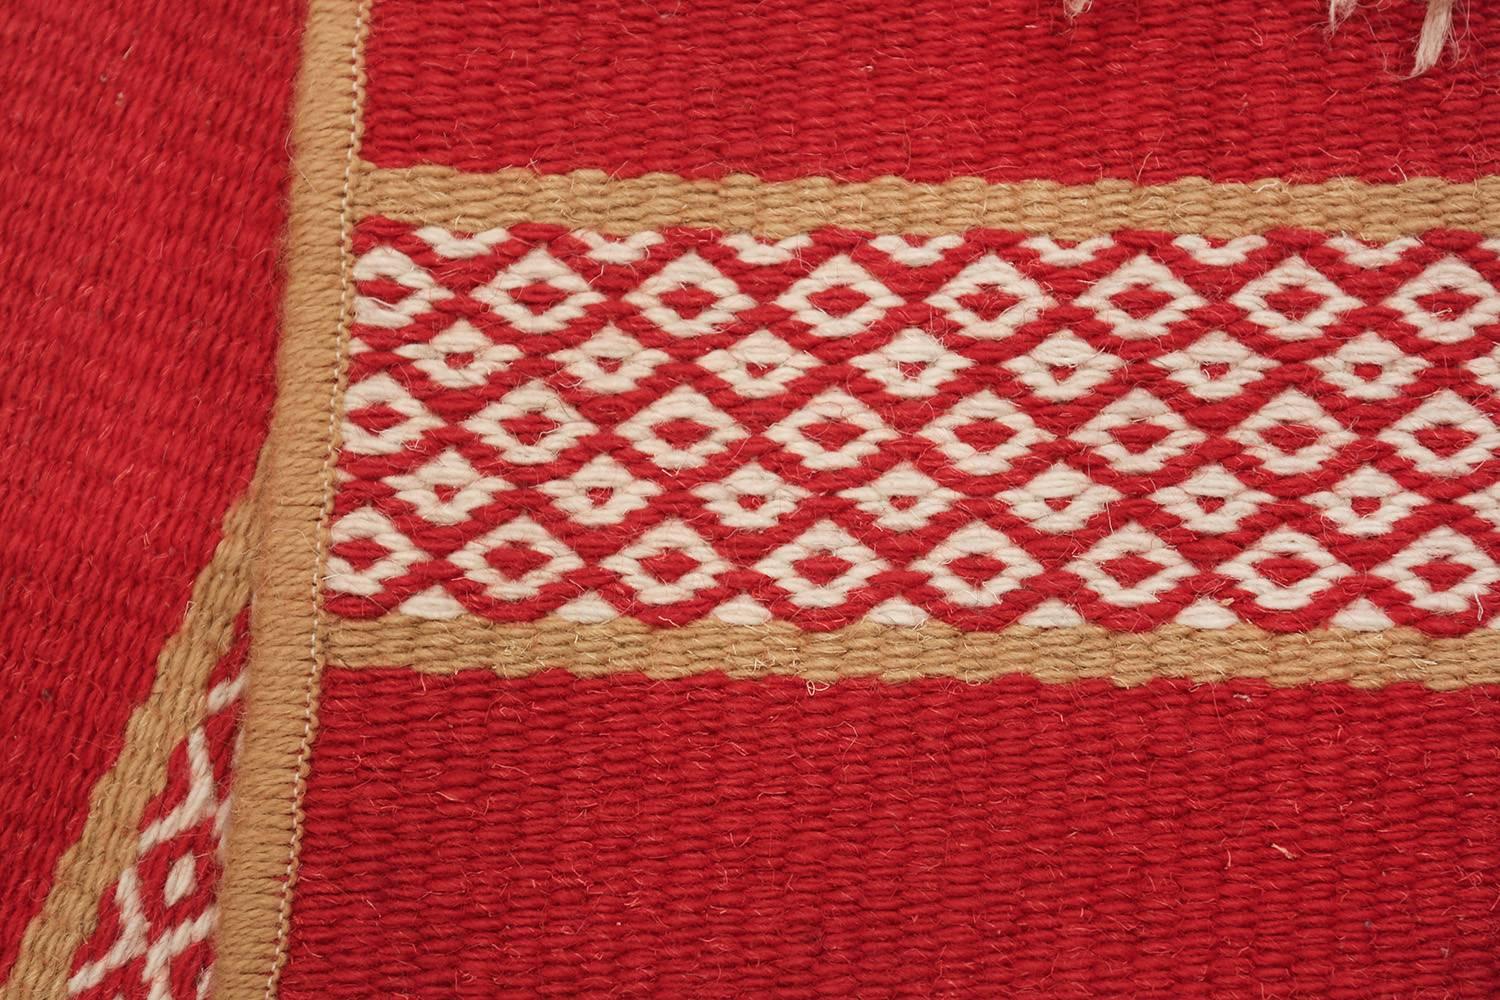 Beautiful Vintage Swedish Scandinavian Runner Rug, Country of Origin / Rug Type: Scandinavia Rug, Circa Date: Mid- 20th Century
In the Western world, the art of fine rug weaving is generally perceived as being a development unique to Near Eastern